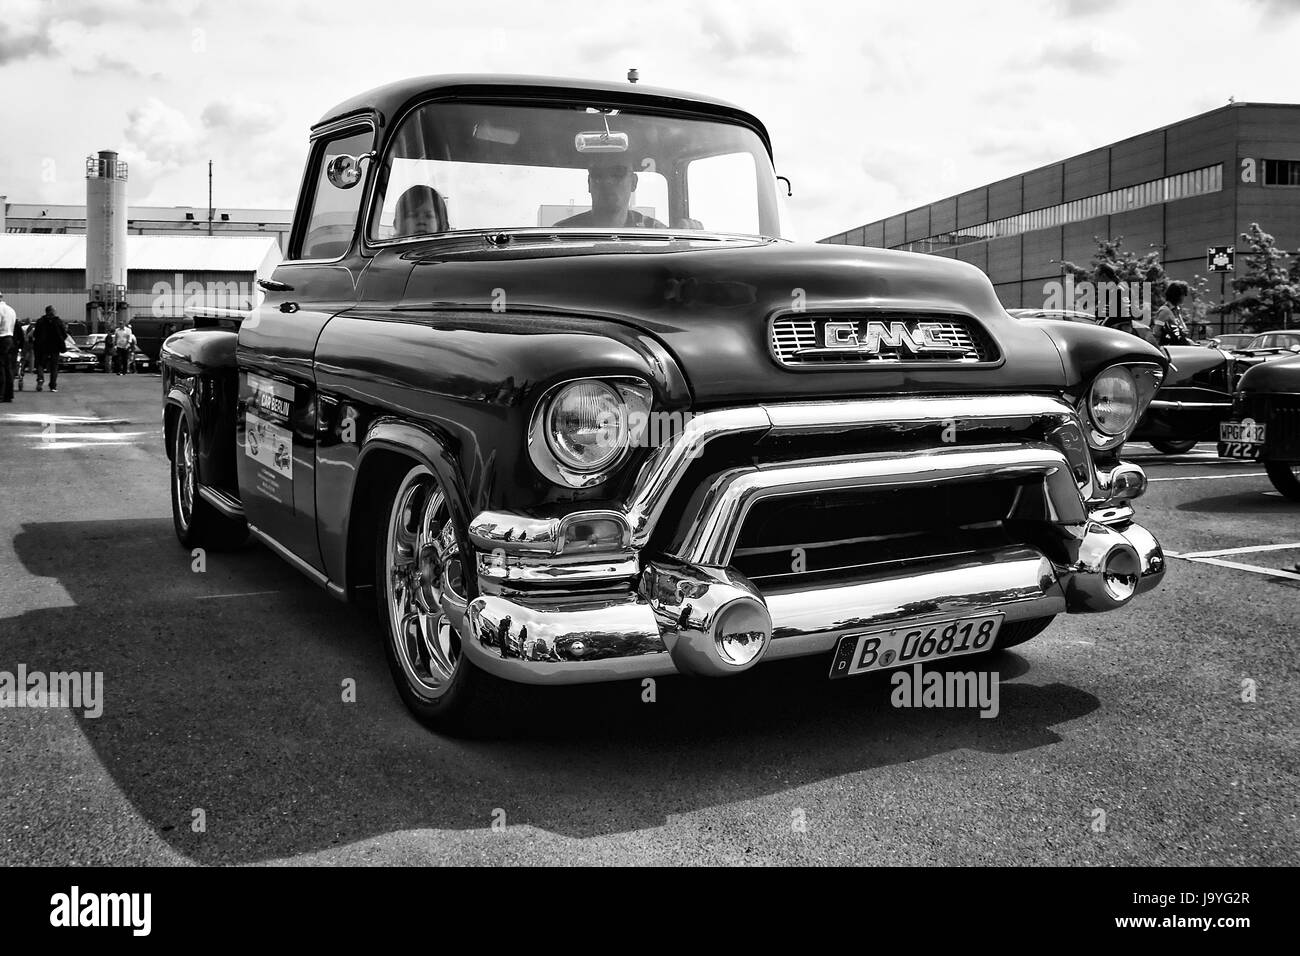 BERLIN - MAY 11: Car GMC Deluxe Cab Pickup Truck 350 V8 TH350 (black and white), 26th Oldtimer-Tage Berlin-Brandenburg, May 11, 2013 Berlin, Germany Stock Photo